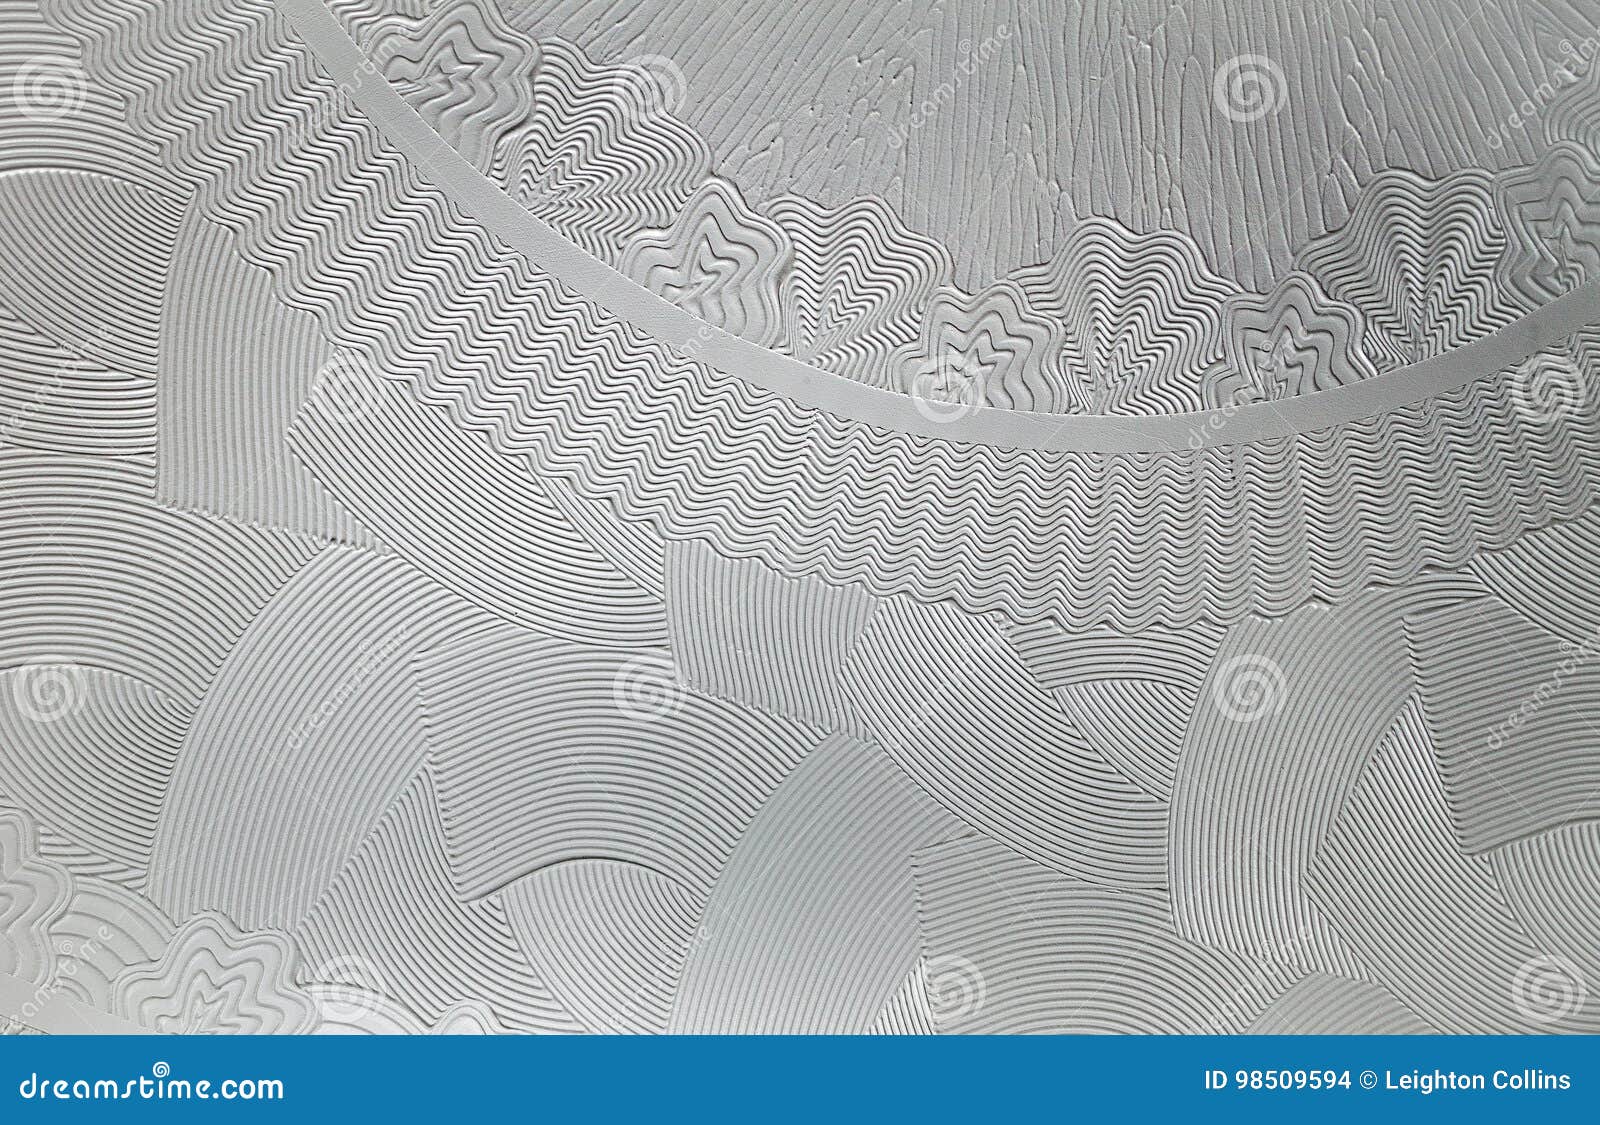 Complex Interwoven Artex Patterns Stock Photo Image Of Ceiling